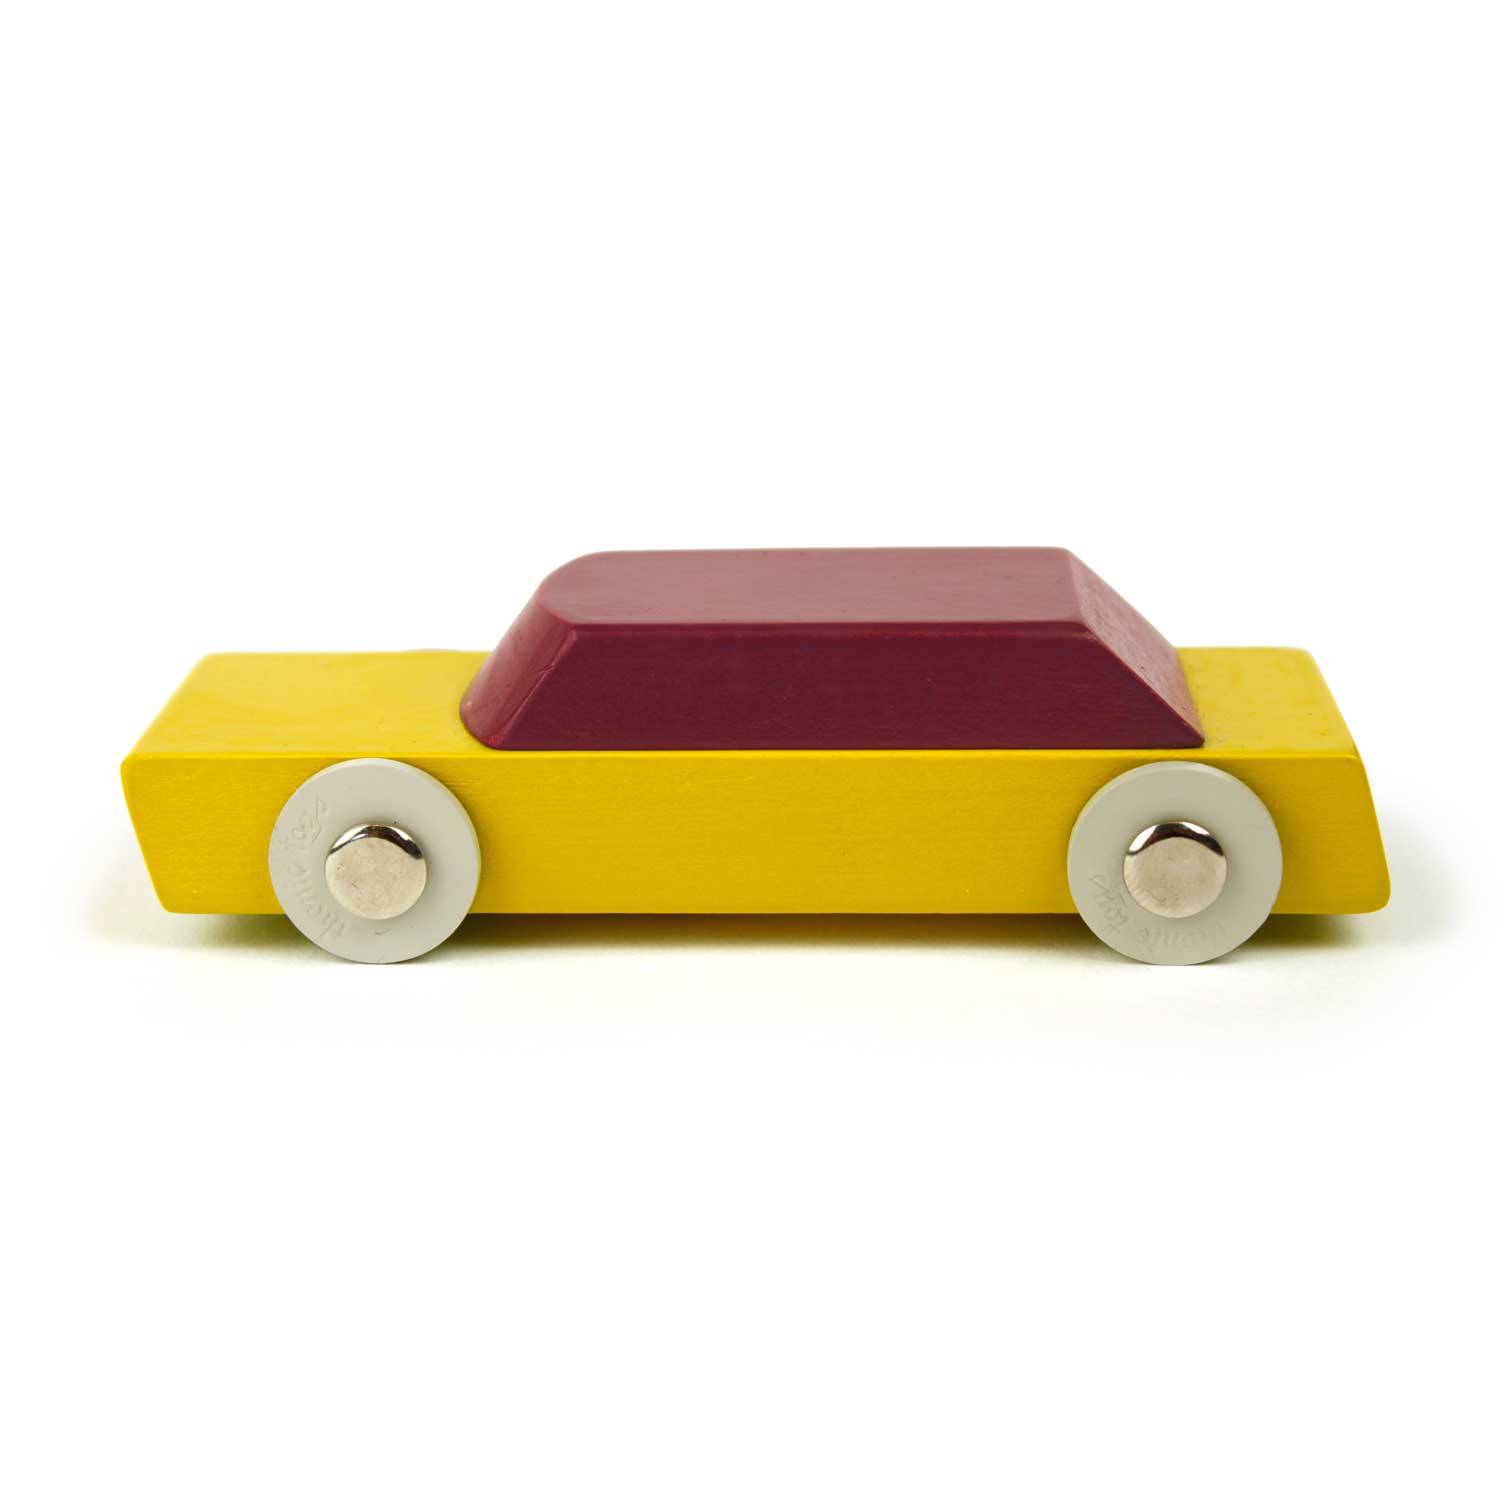 duotone car #2 | a contemporary toy car | designed by floris hovers ...